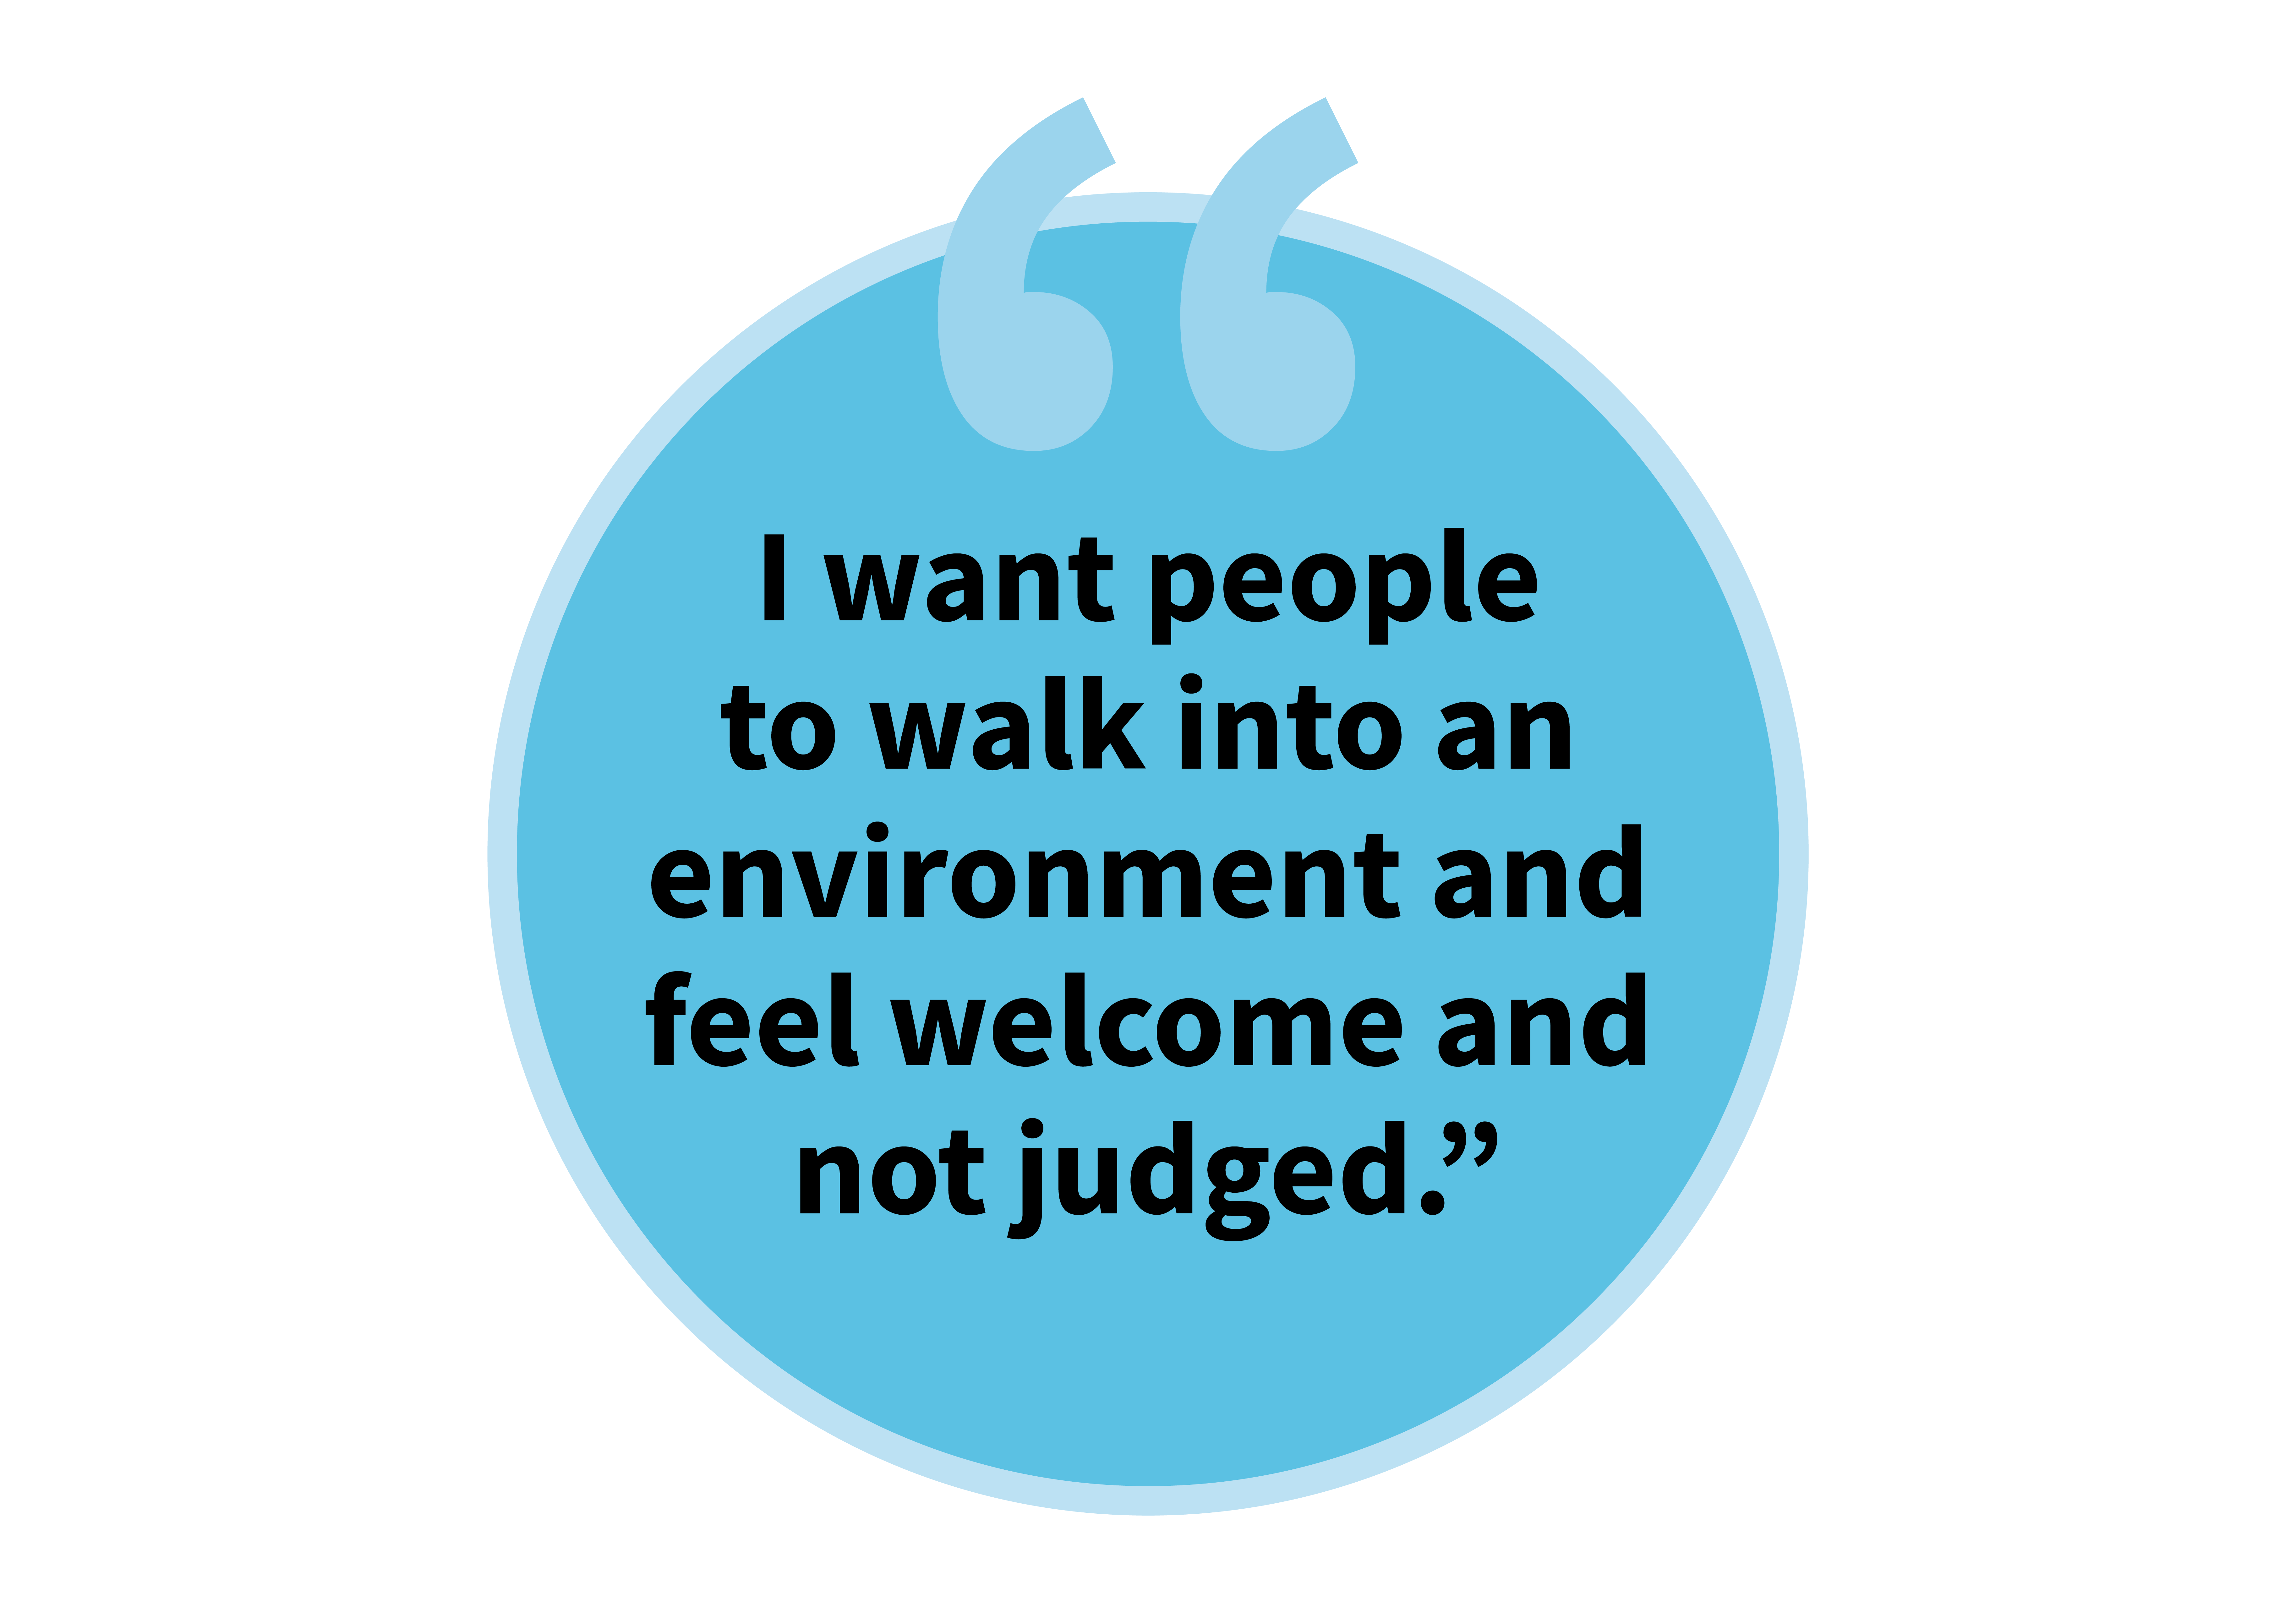 Quote saying "I want people to walk into an environment and feel welcome and not judged"